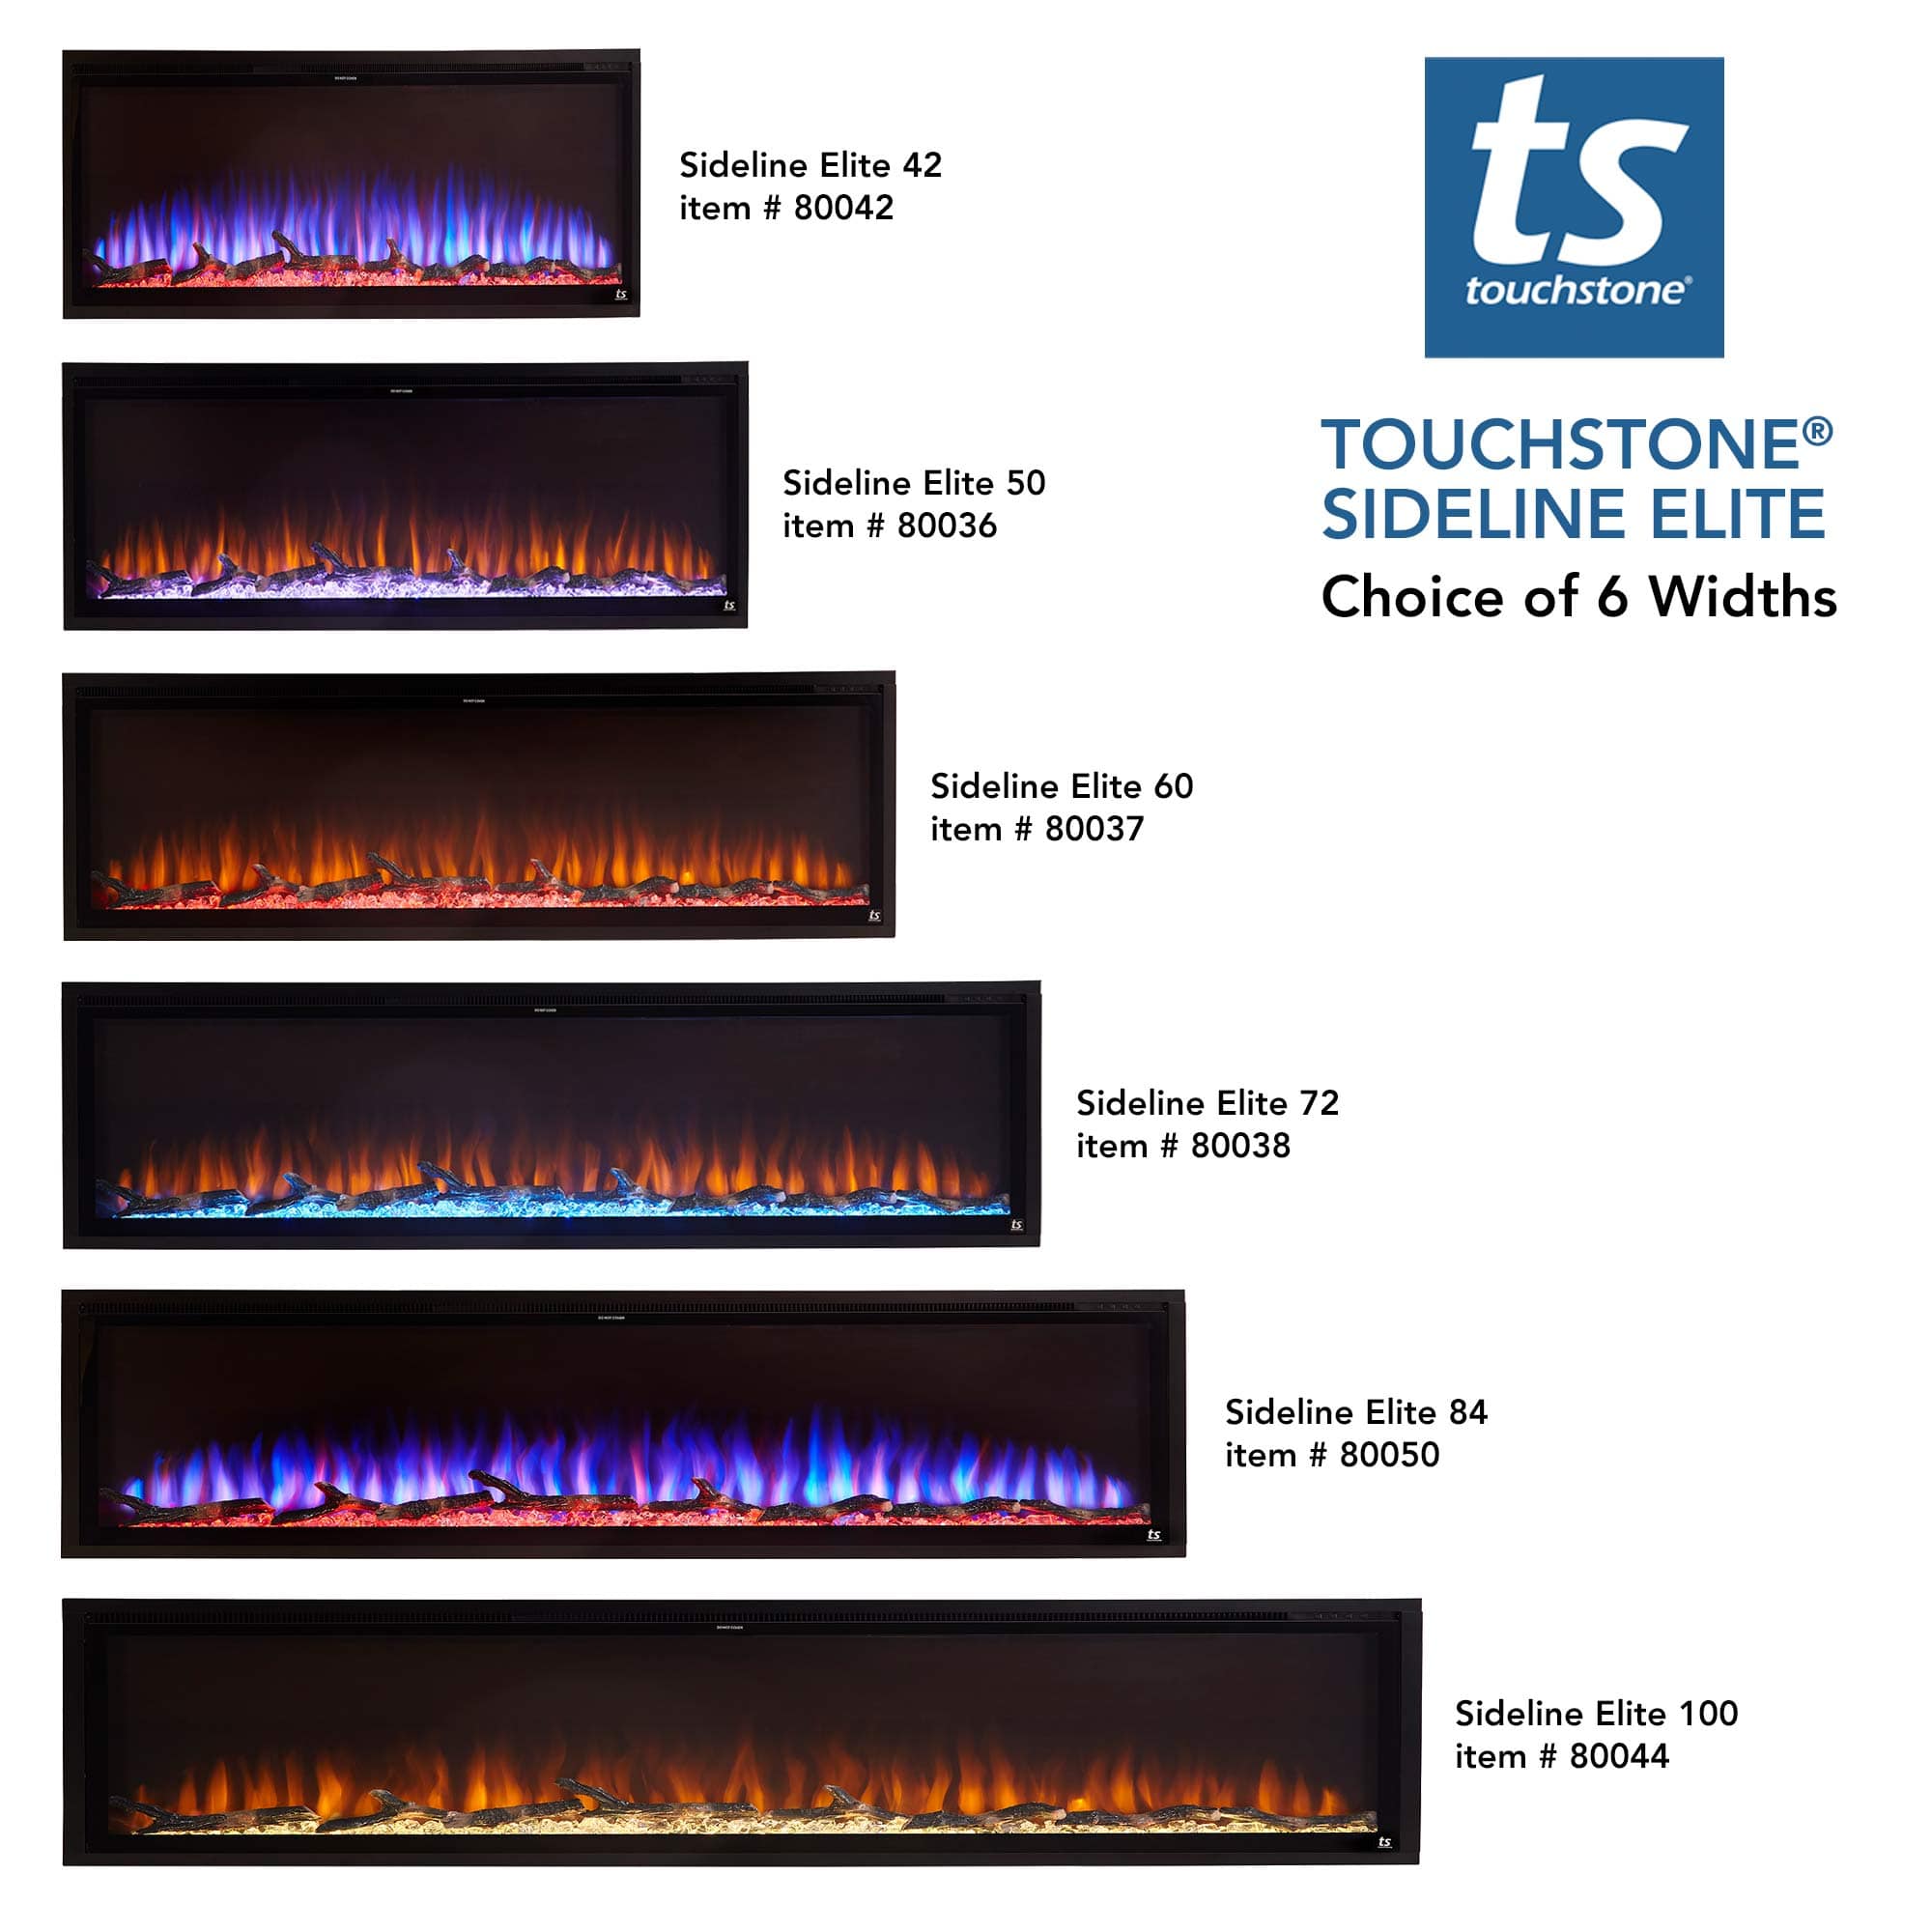 The Touchstone Sideline Elite Smart Electric Fireplace is available in a variety of widths from 42 inches to 100 inches